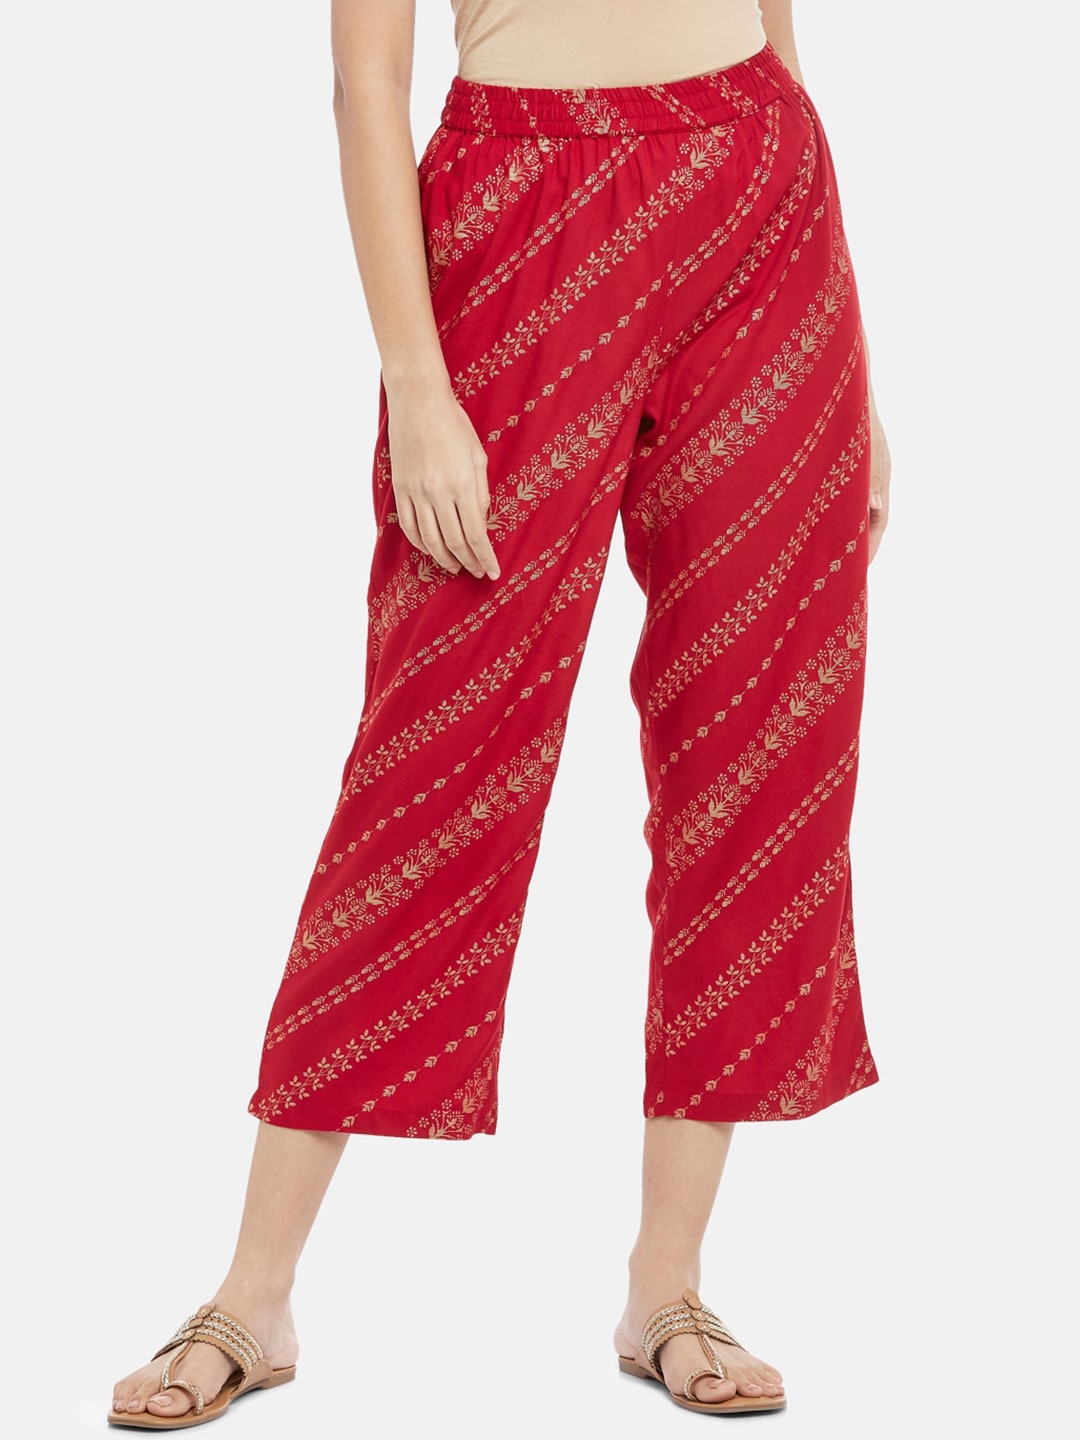 RANGMANCH BY PANTALOONS Women Red & Gold-Toned Floral Striped Cropped Ethnic Palazzos Price in India